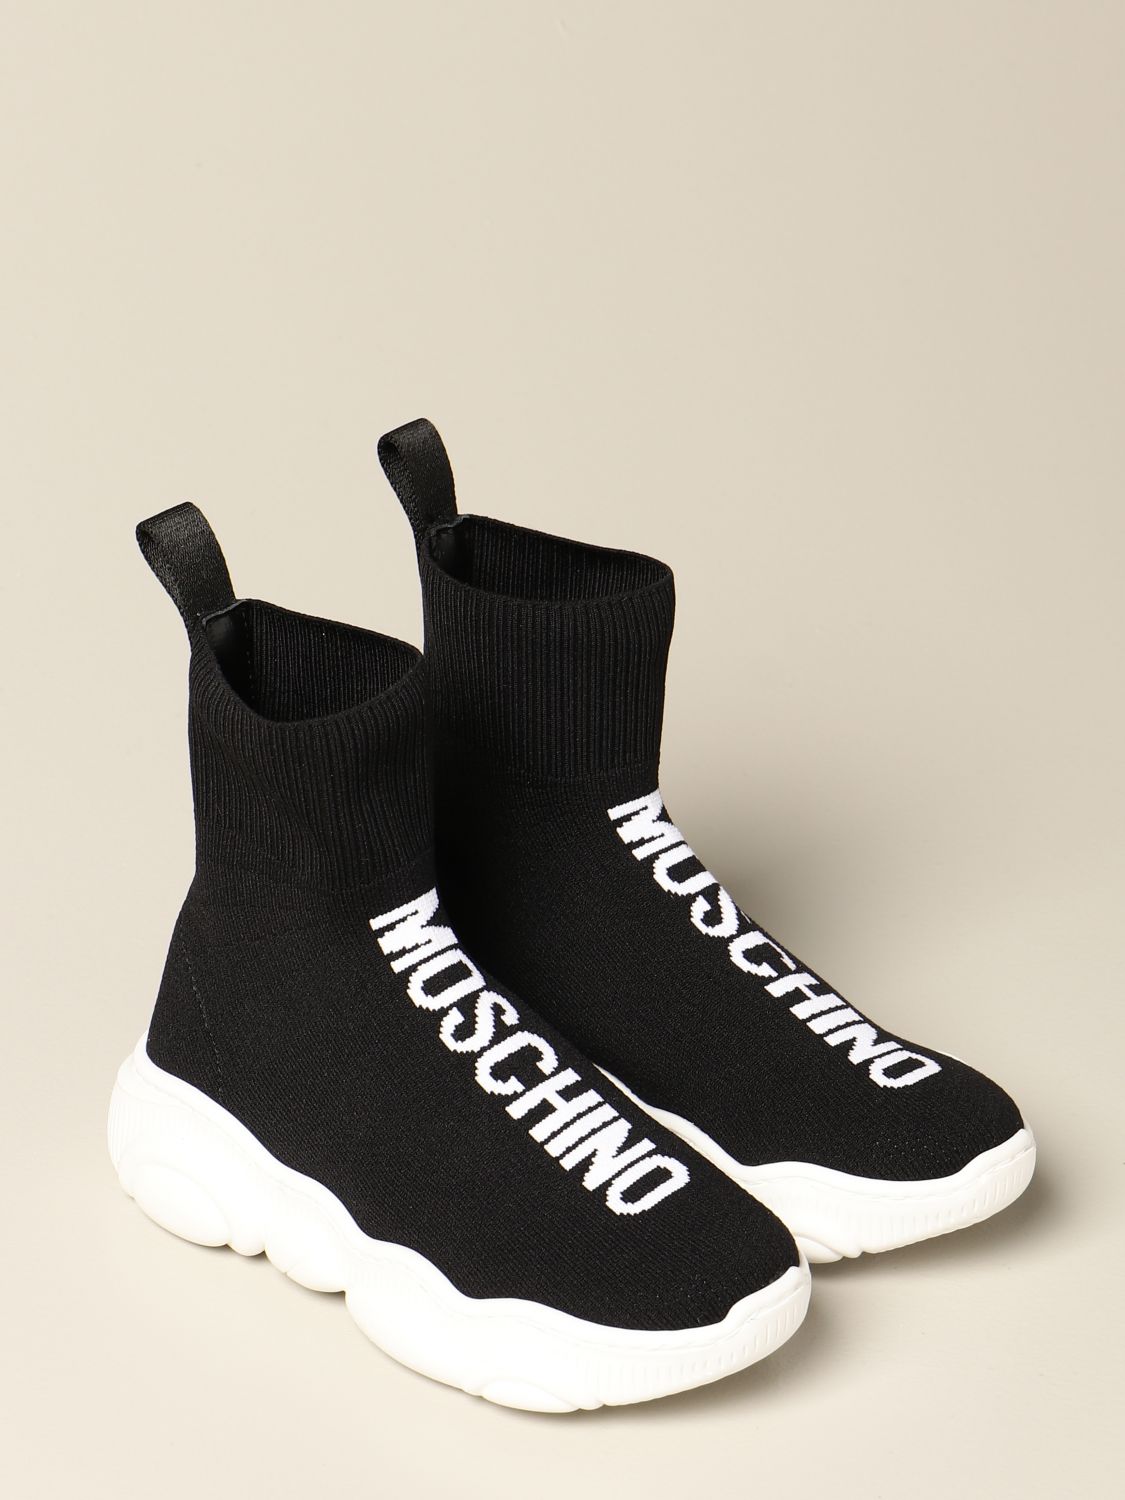 moschino slip on shoes